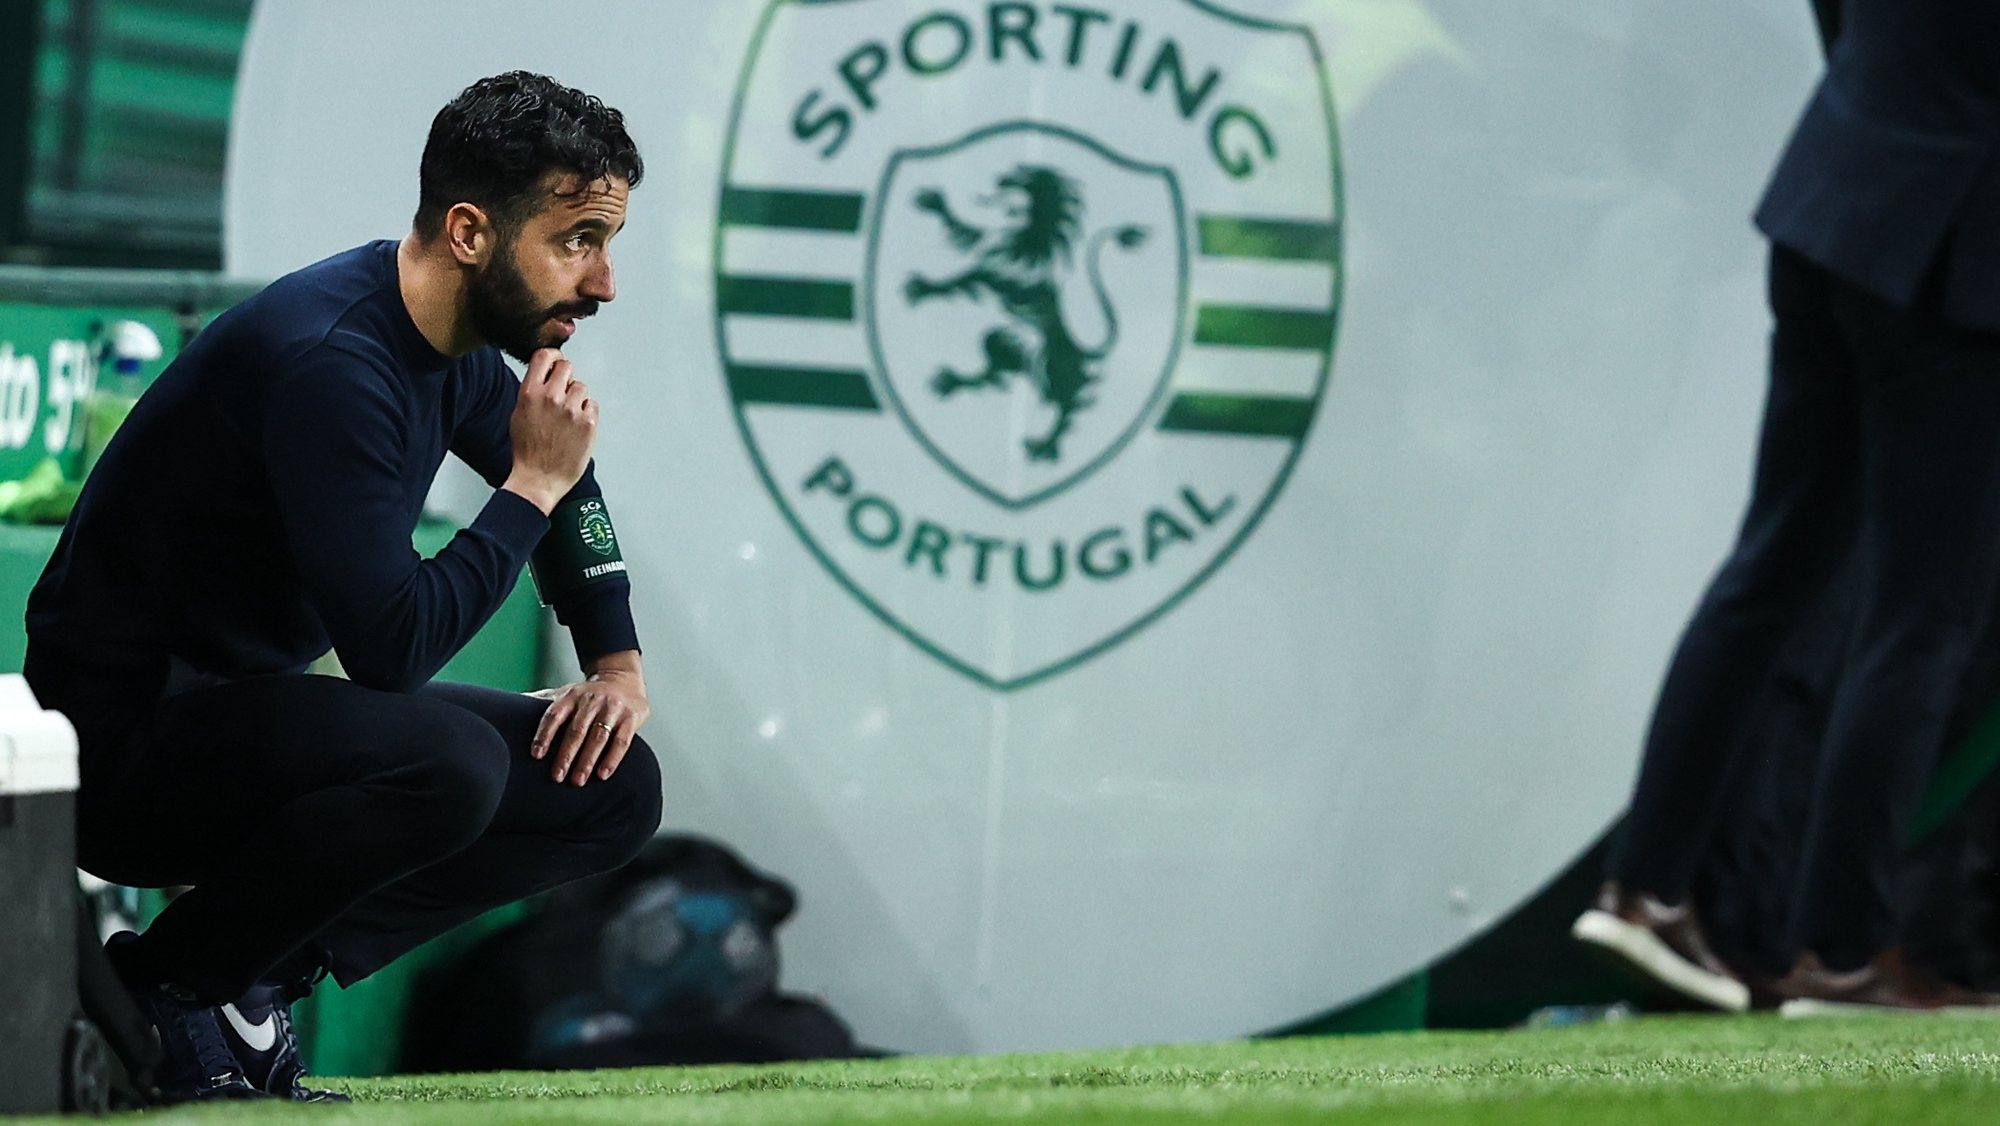 Sporting&#039;s head coach Ruben Amorim reacts during the Portuguese First League soccer match, between Sporting and Benfica, held on Alvalade stadium in Lisbon, Portugal, 17 April 2022. RODRIGO ANTUNES/LUSA